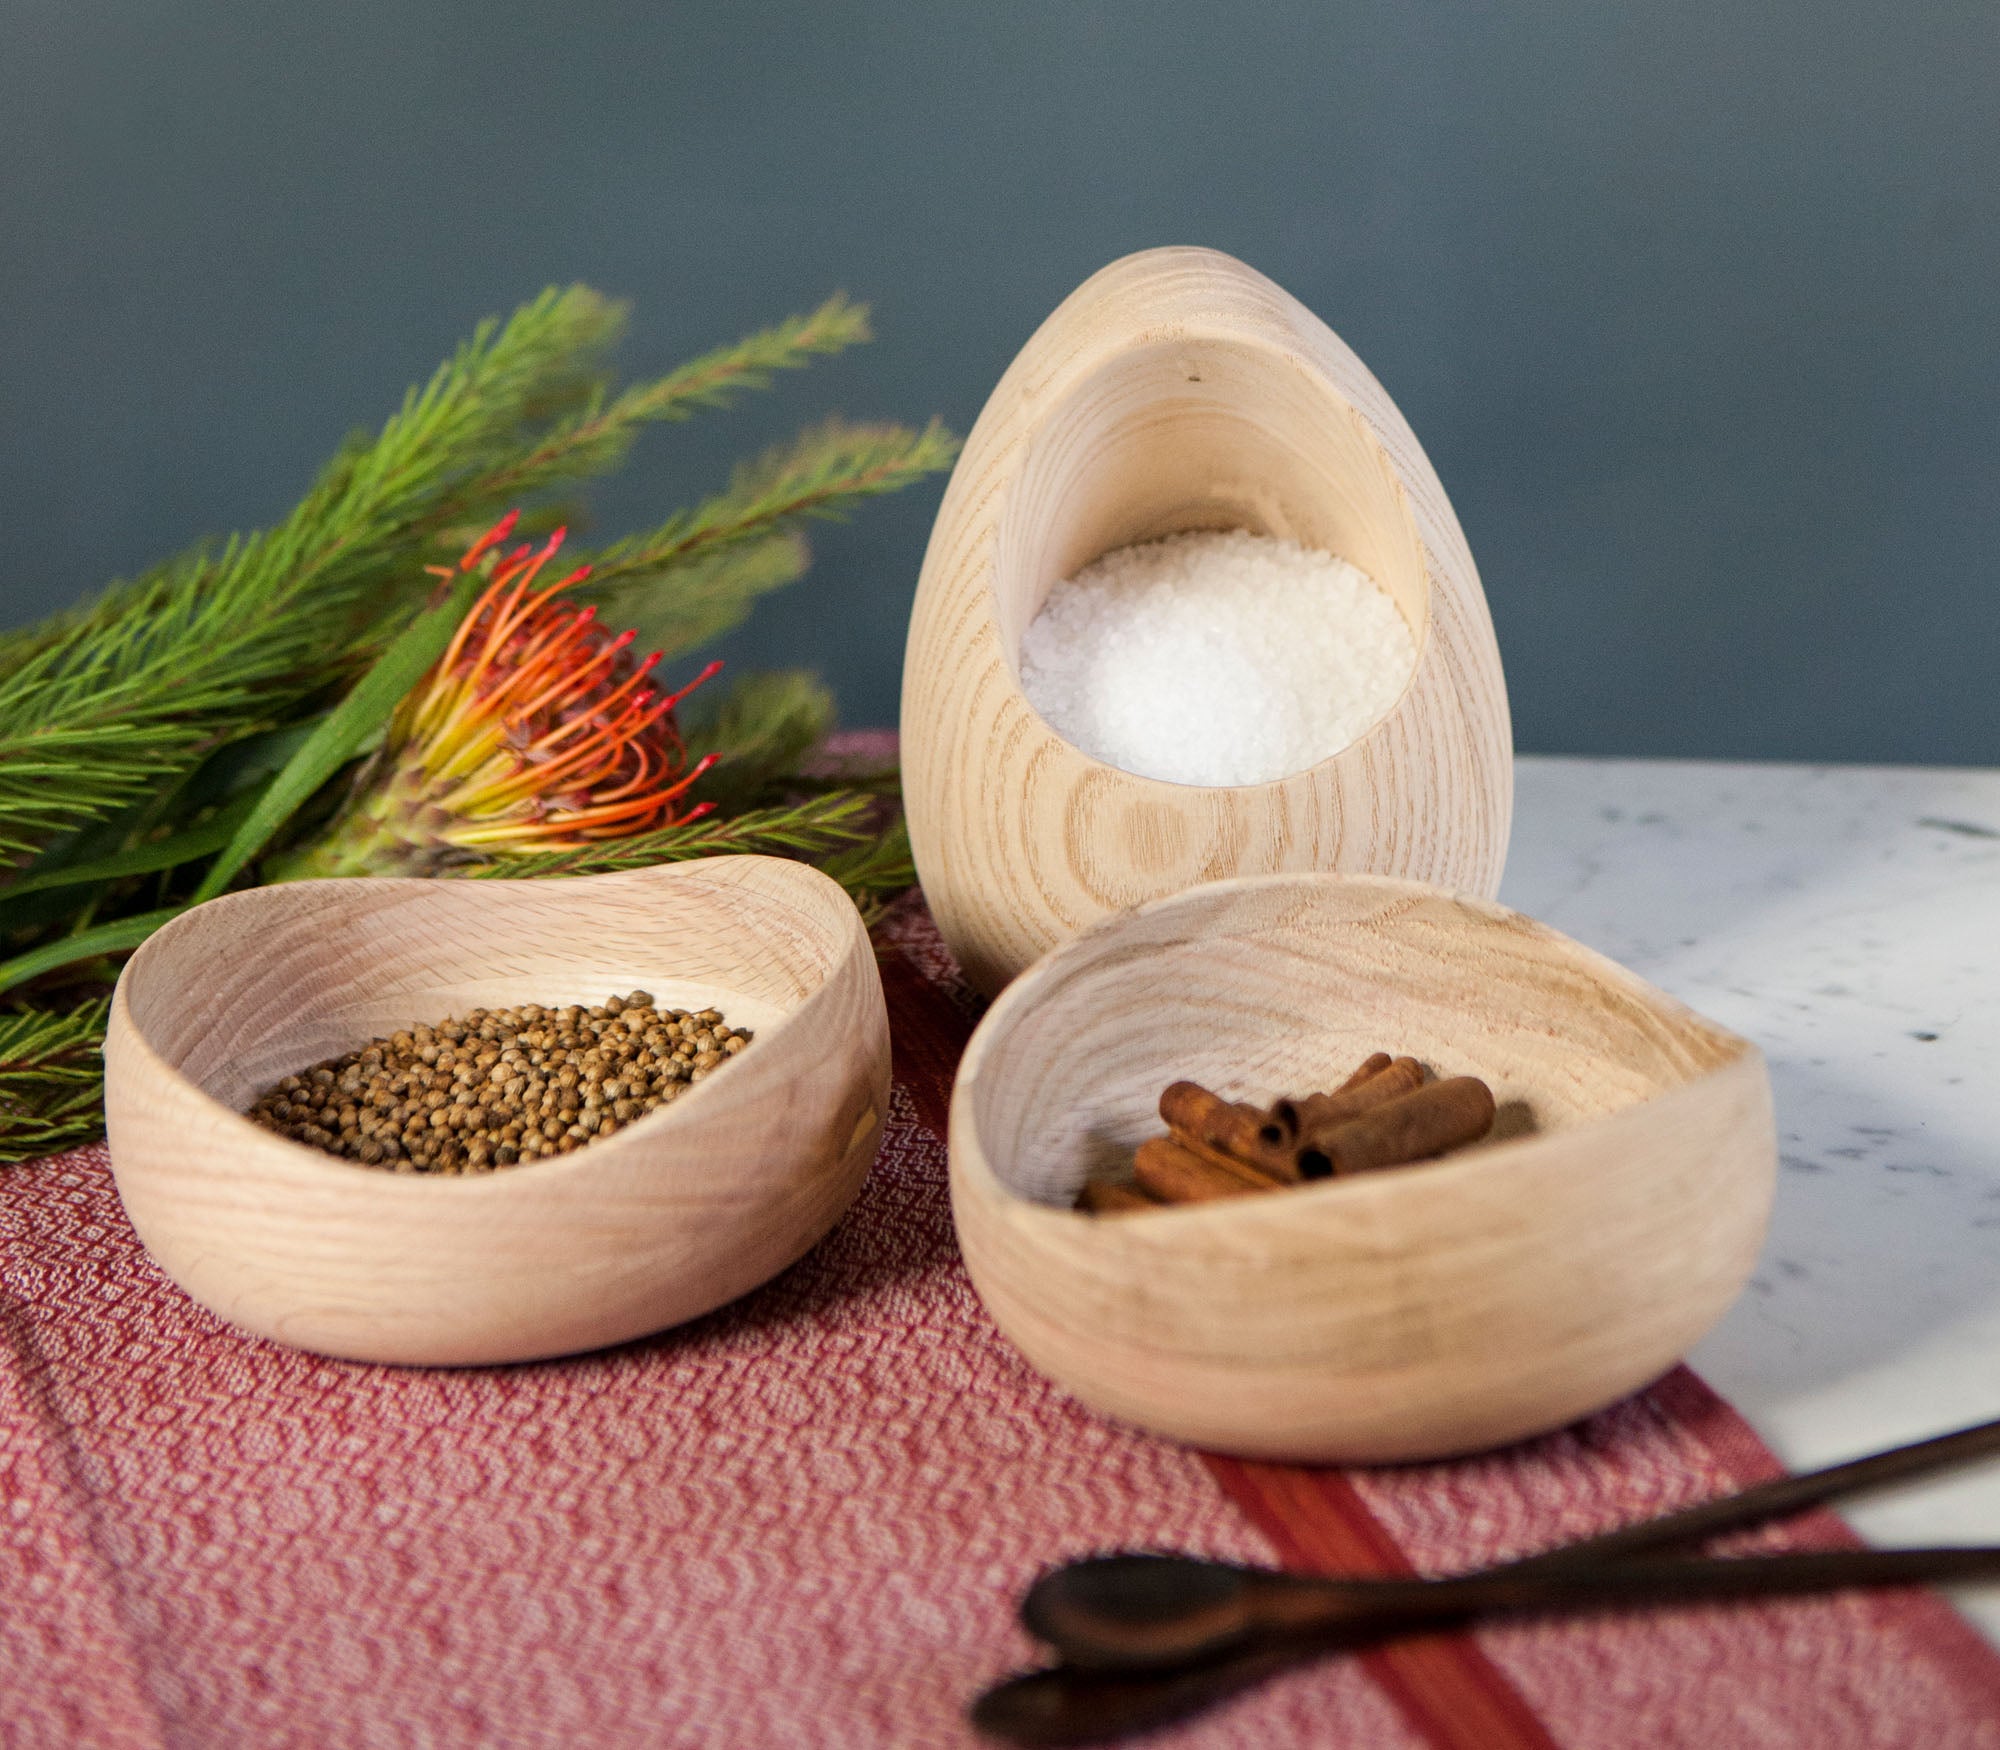 A selection of Coco Africa kitchenware pinch pots for salt and pepper. Coco Africa wooden home décor products are available at Sarza home goods and furniture store in Rye New York